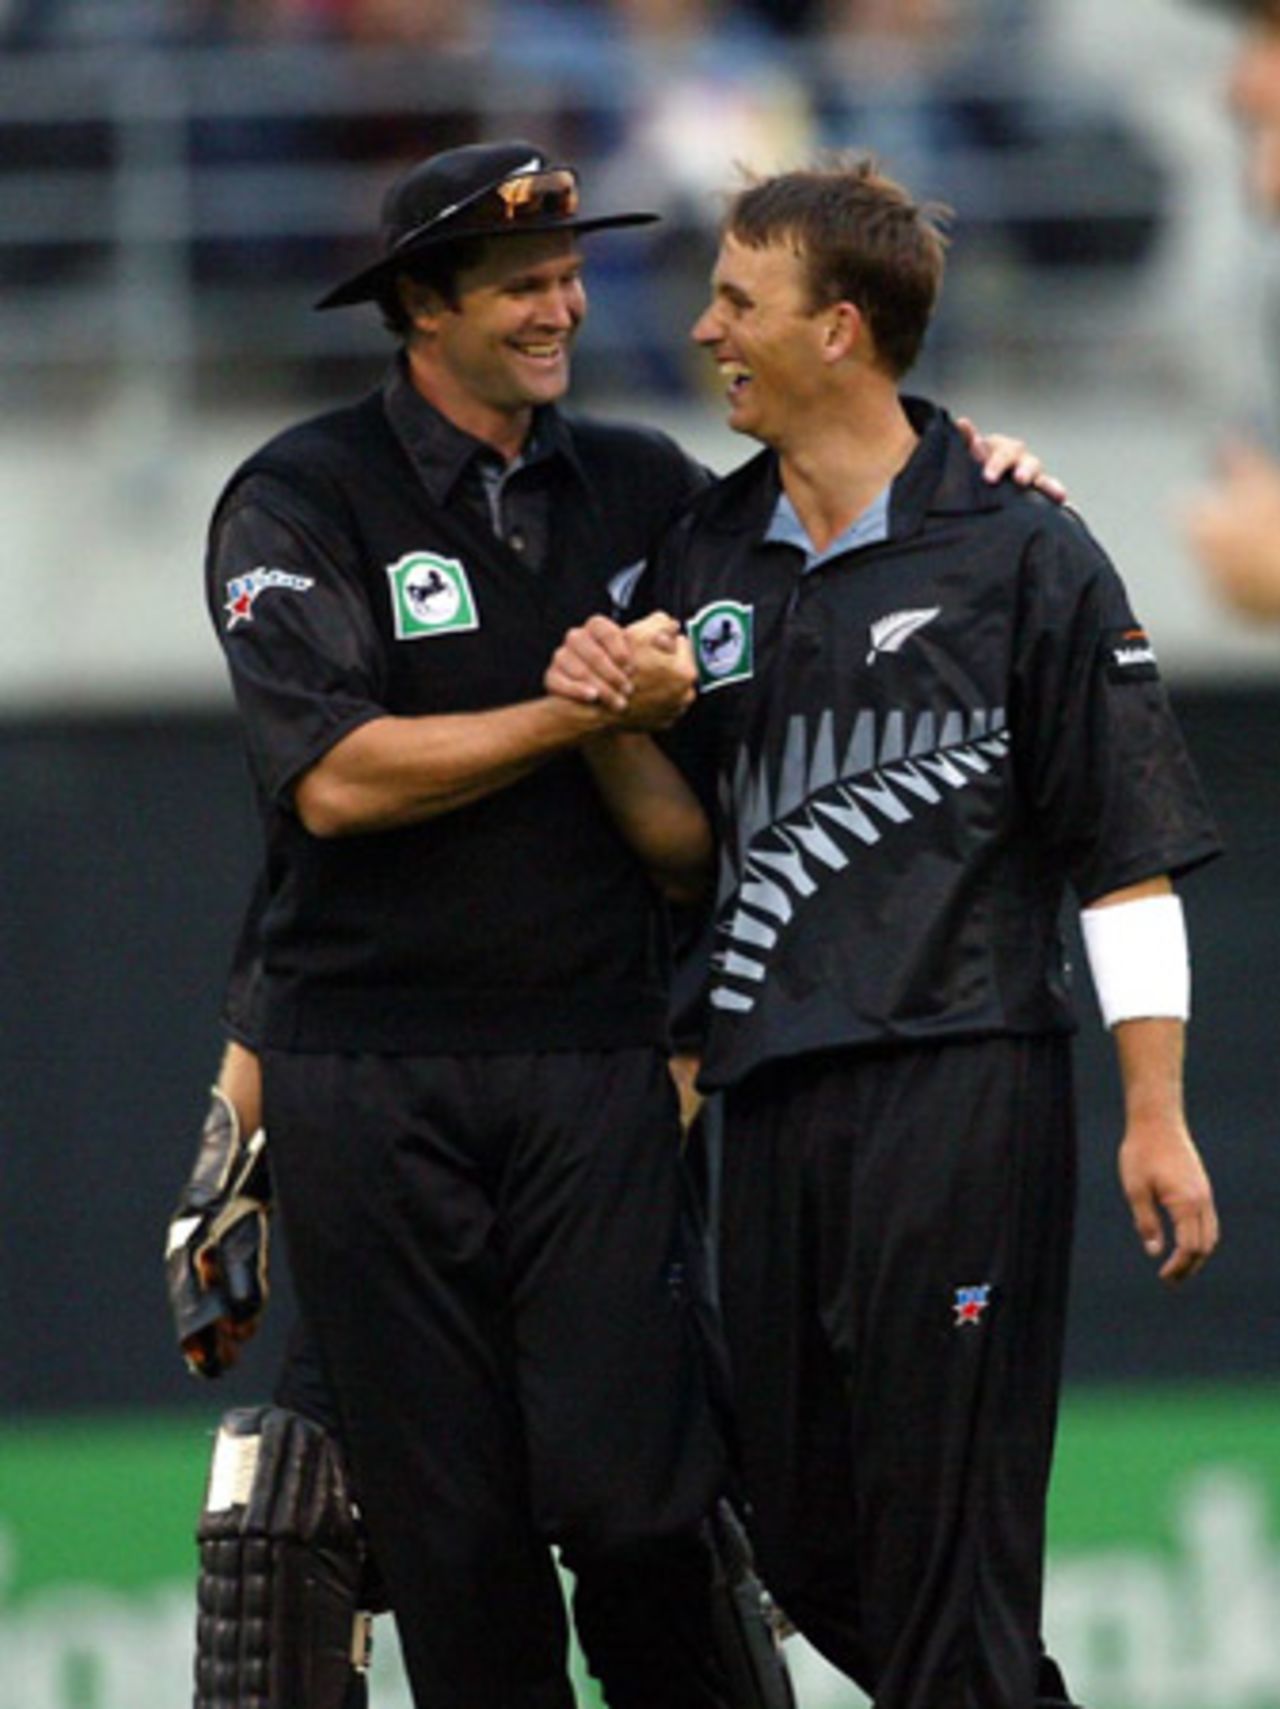 New Zealand captain Chris Cairns (left) and bowler Shane Bond celebrate the dismissal of Indian batsman Virender Sehwag, caught by Andre Adams off the bowling of Bond for nine in his first innings. Super Max International: New Zealand v India at Jade Stadium, Christchurch, 4 December 2002.